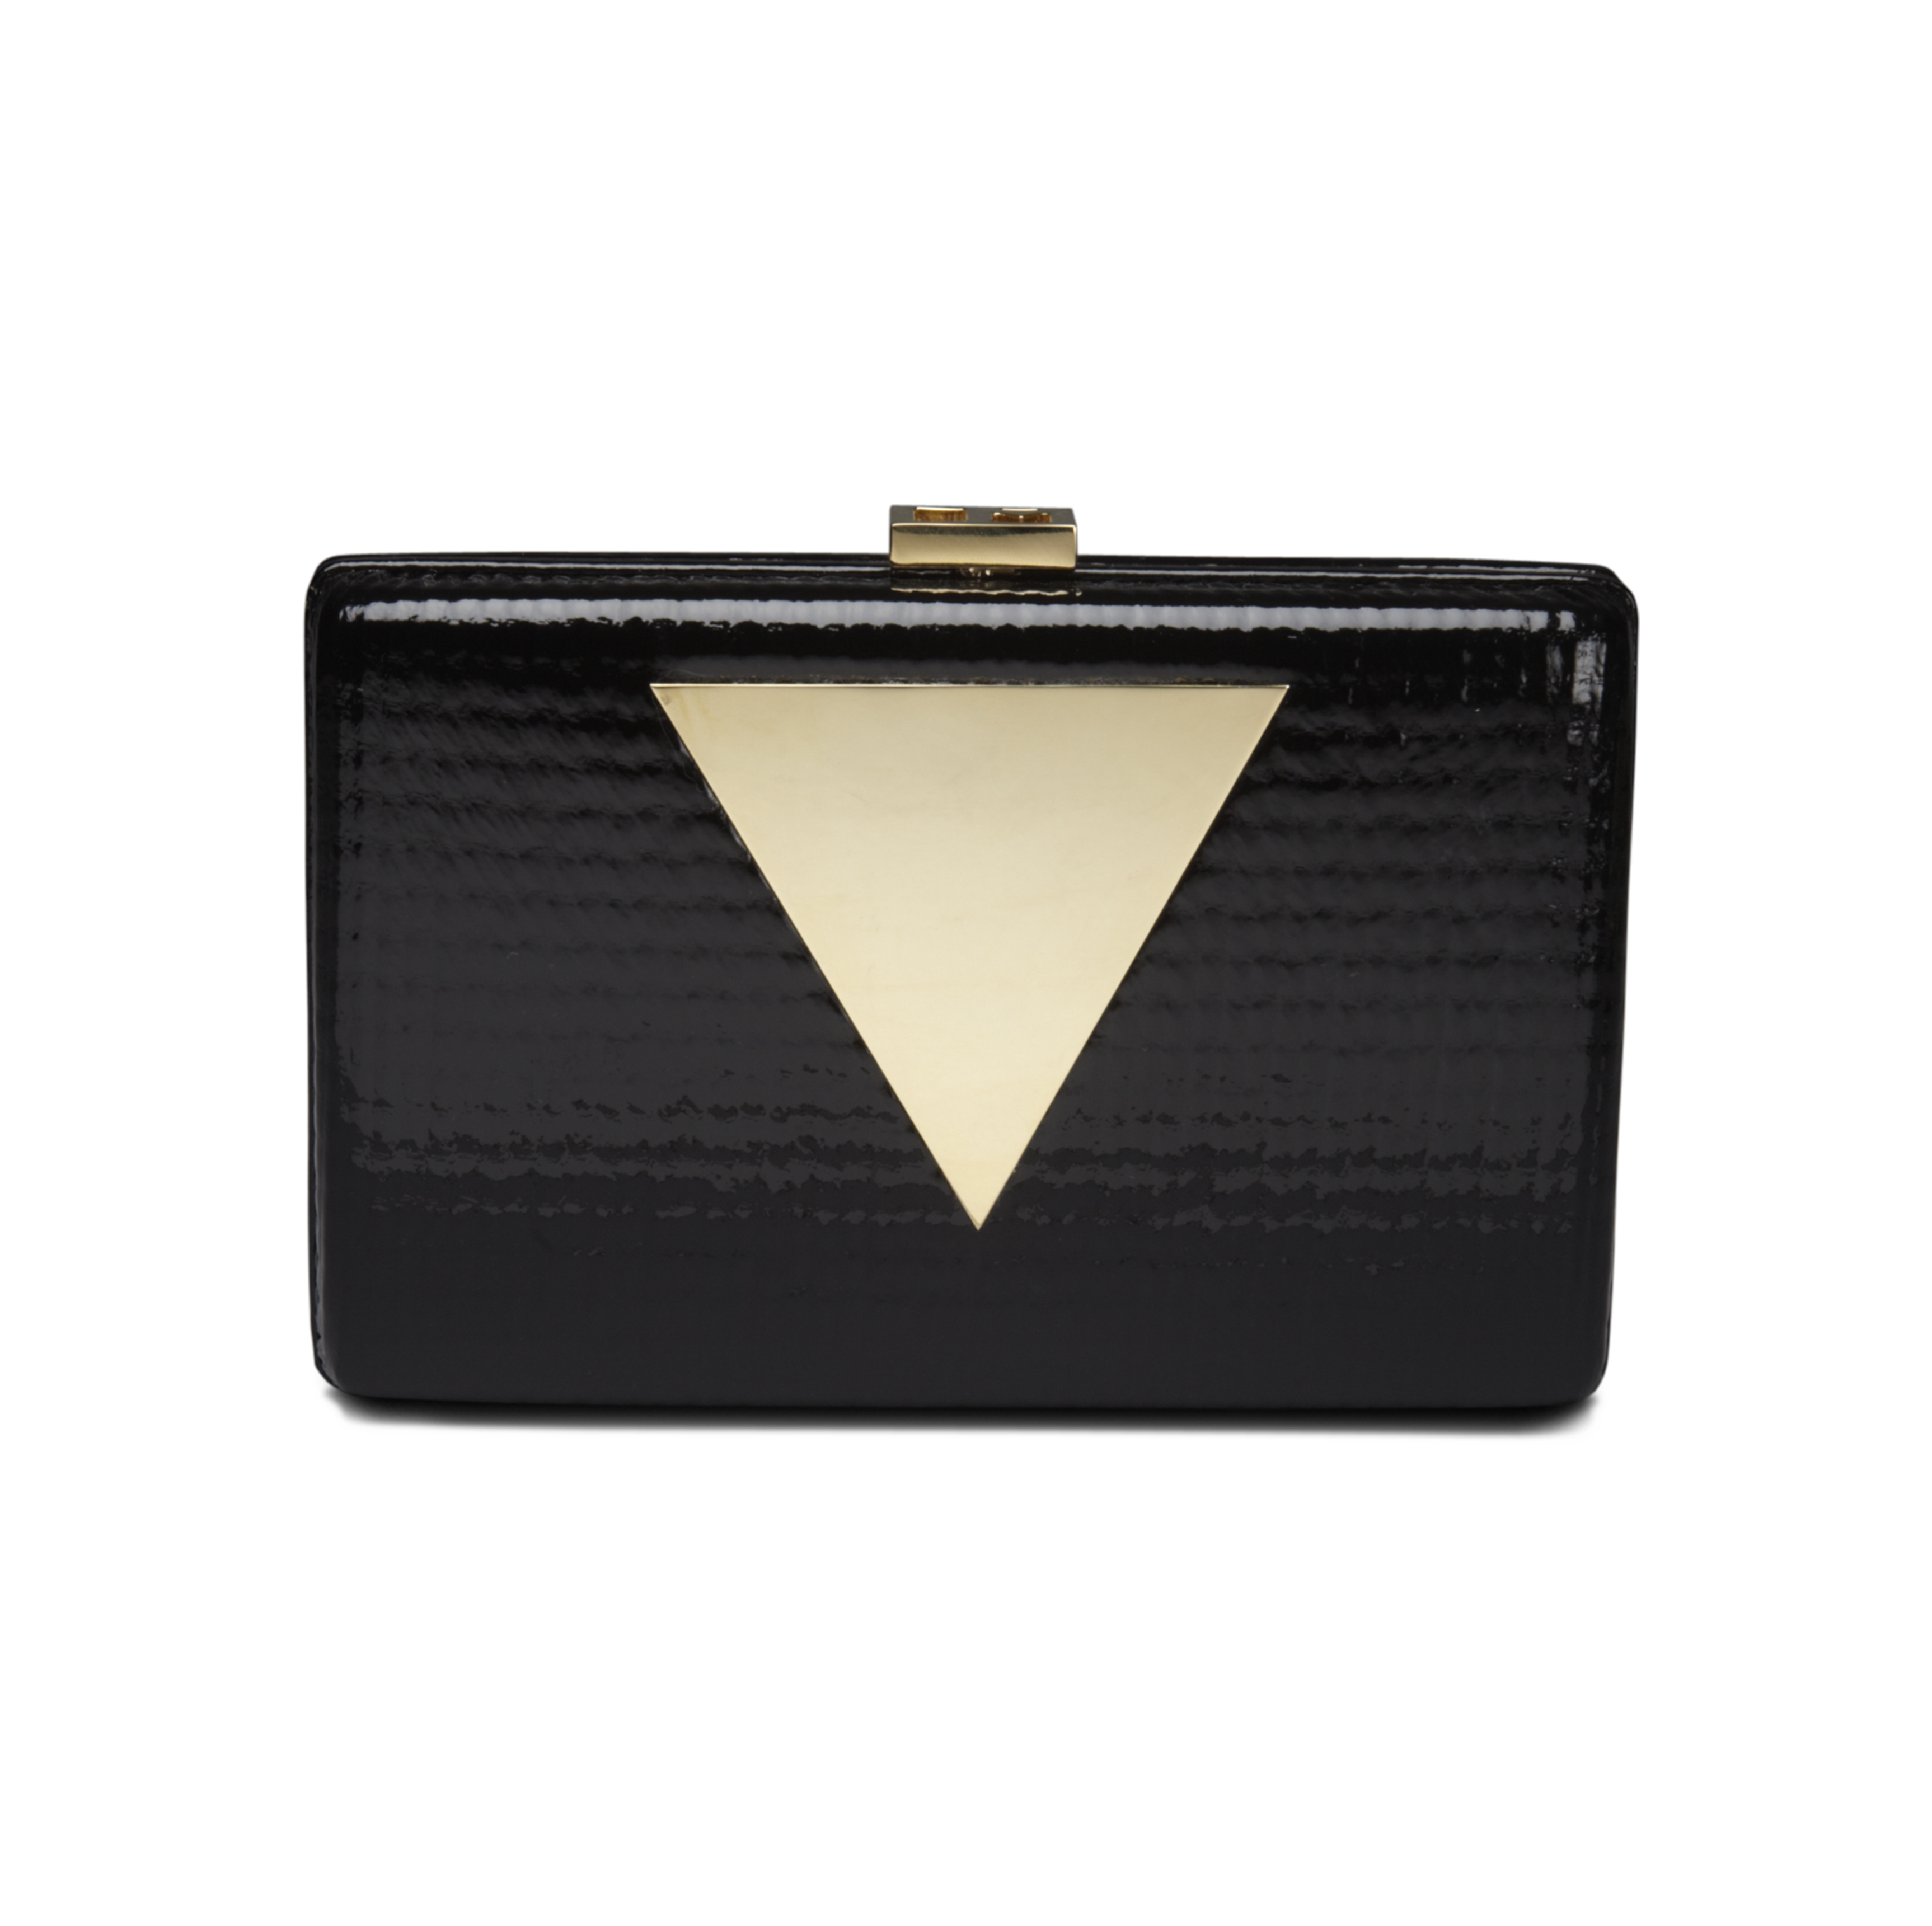 Jill Milan Holland Park Clutch in black and gold